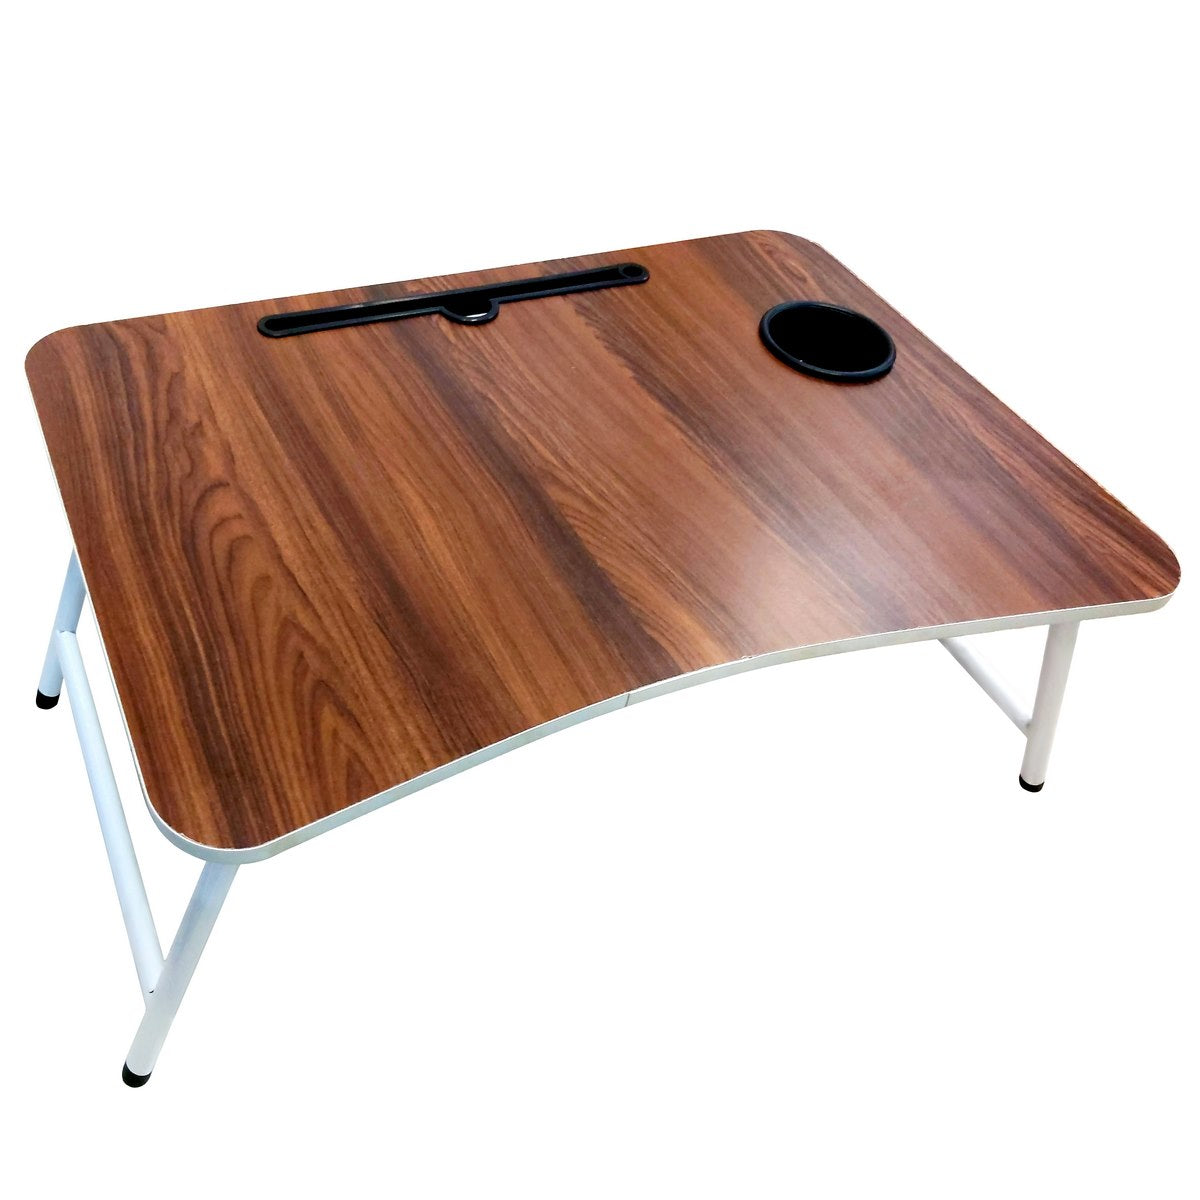 Folding Wooden Laptop Desk Table - For Office Use, Personal Use, Students Study Table, Corporate Gifting JALDTL00